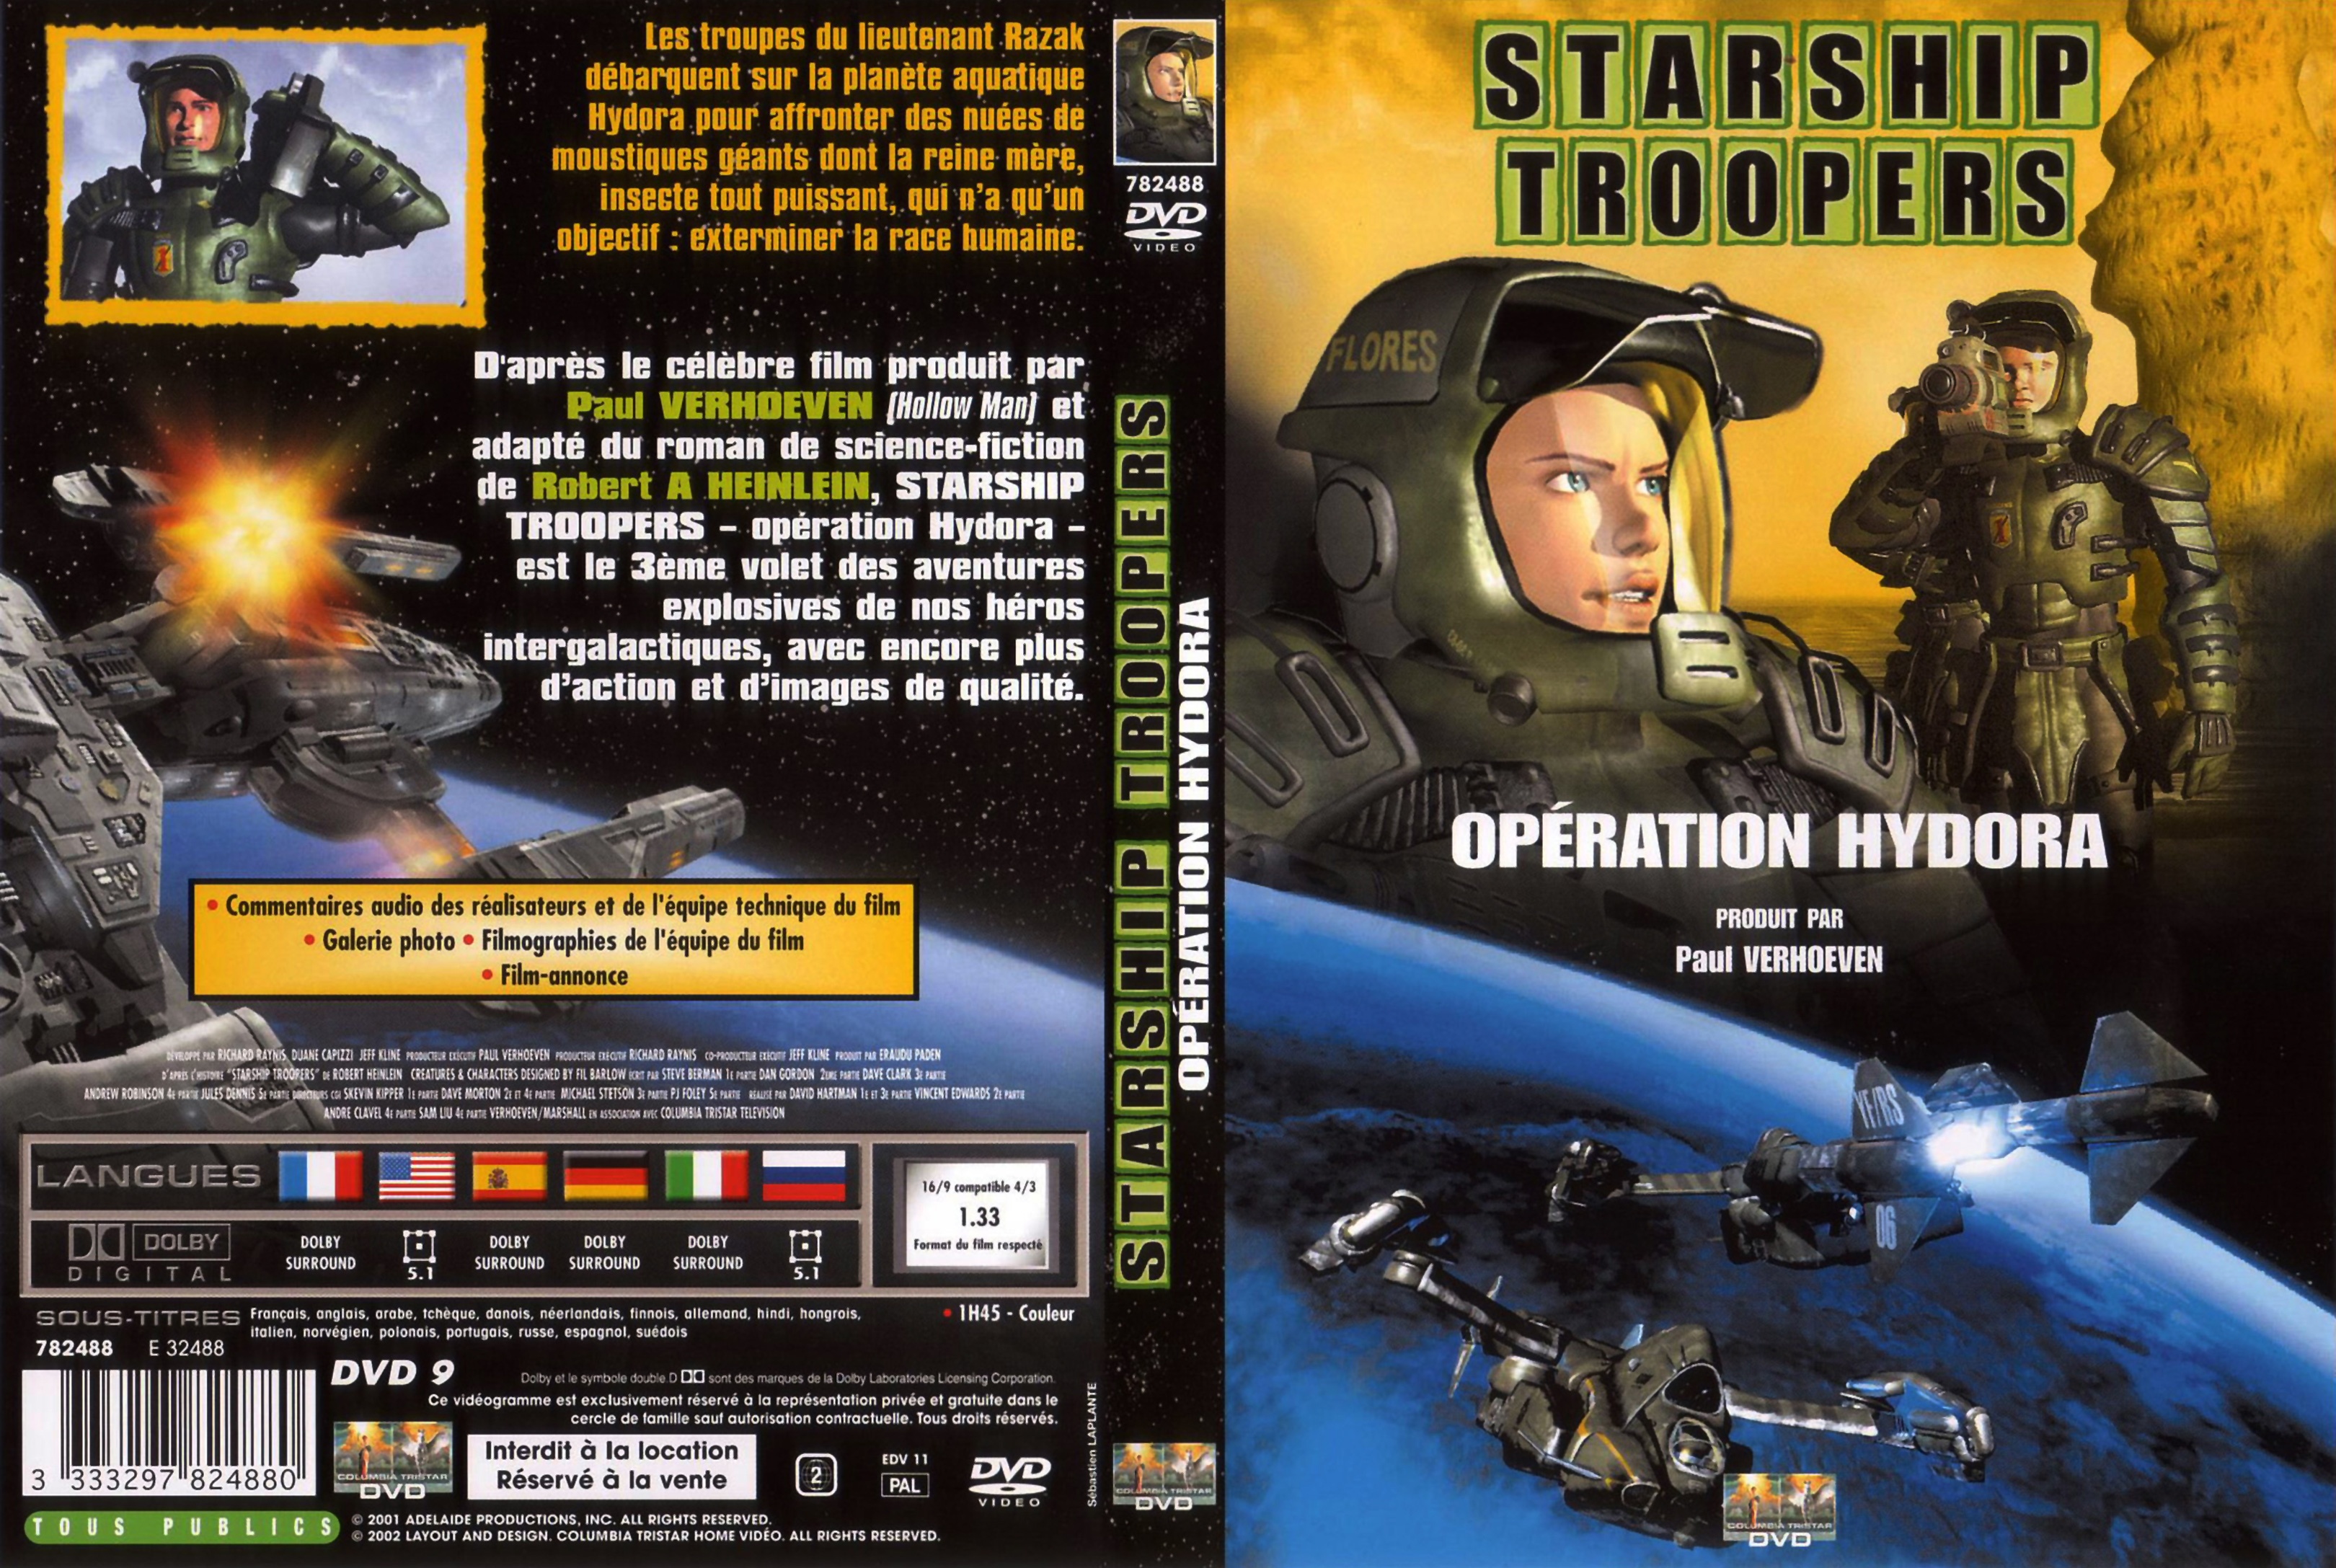 Jaquette DVD Starship troopers operation hydora